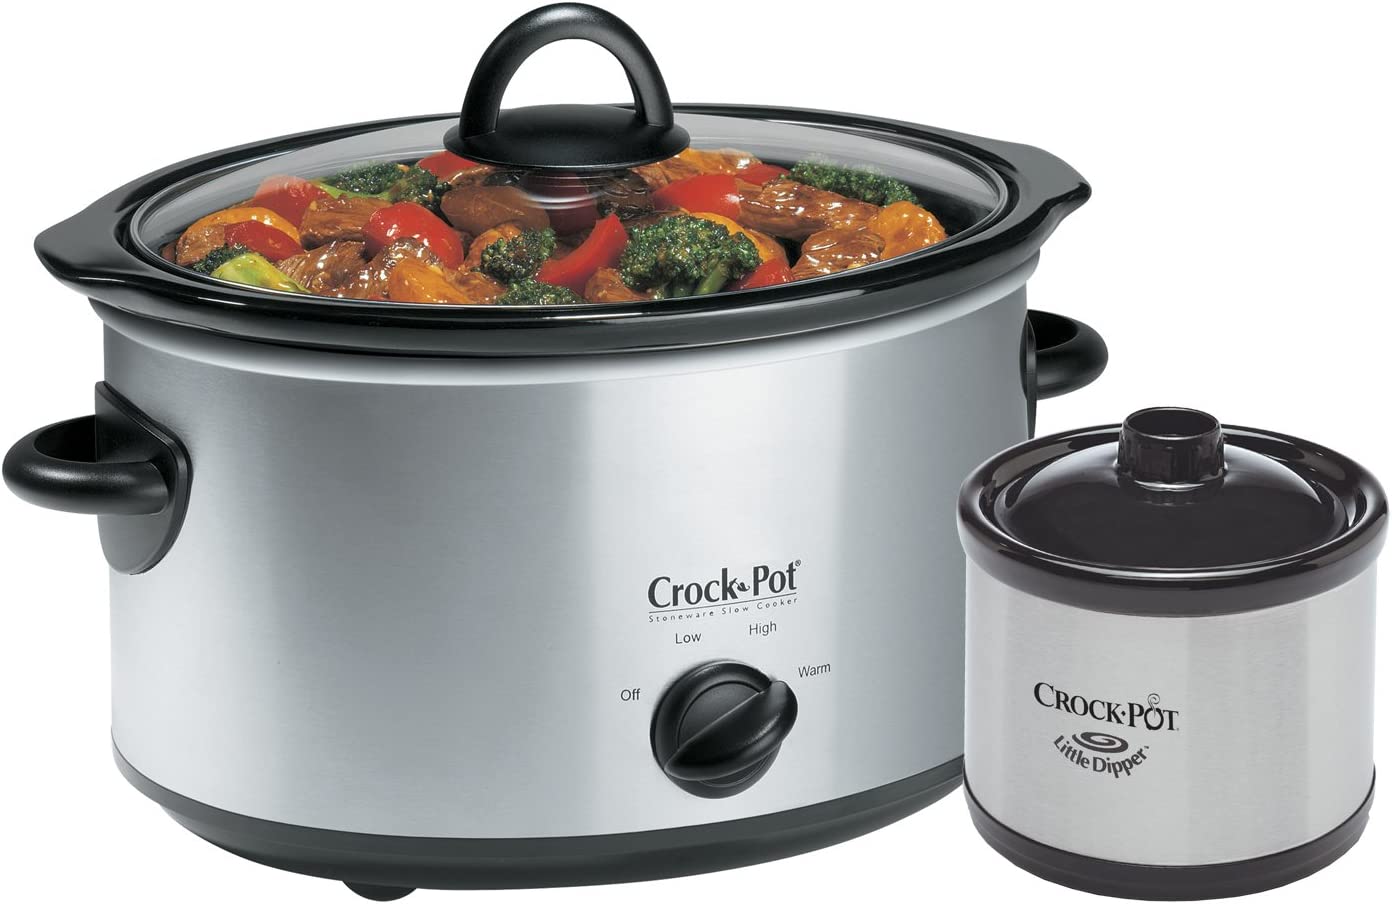 Crock-Pot SCV503SS-CN 5Qt Oval Manual with Dipper, Stainless Steel - Open Box